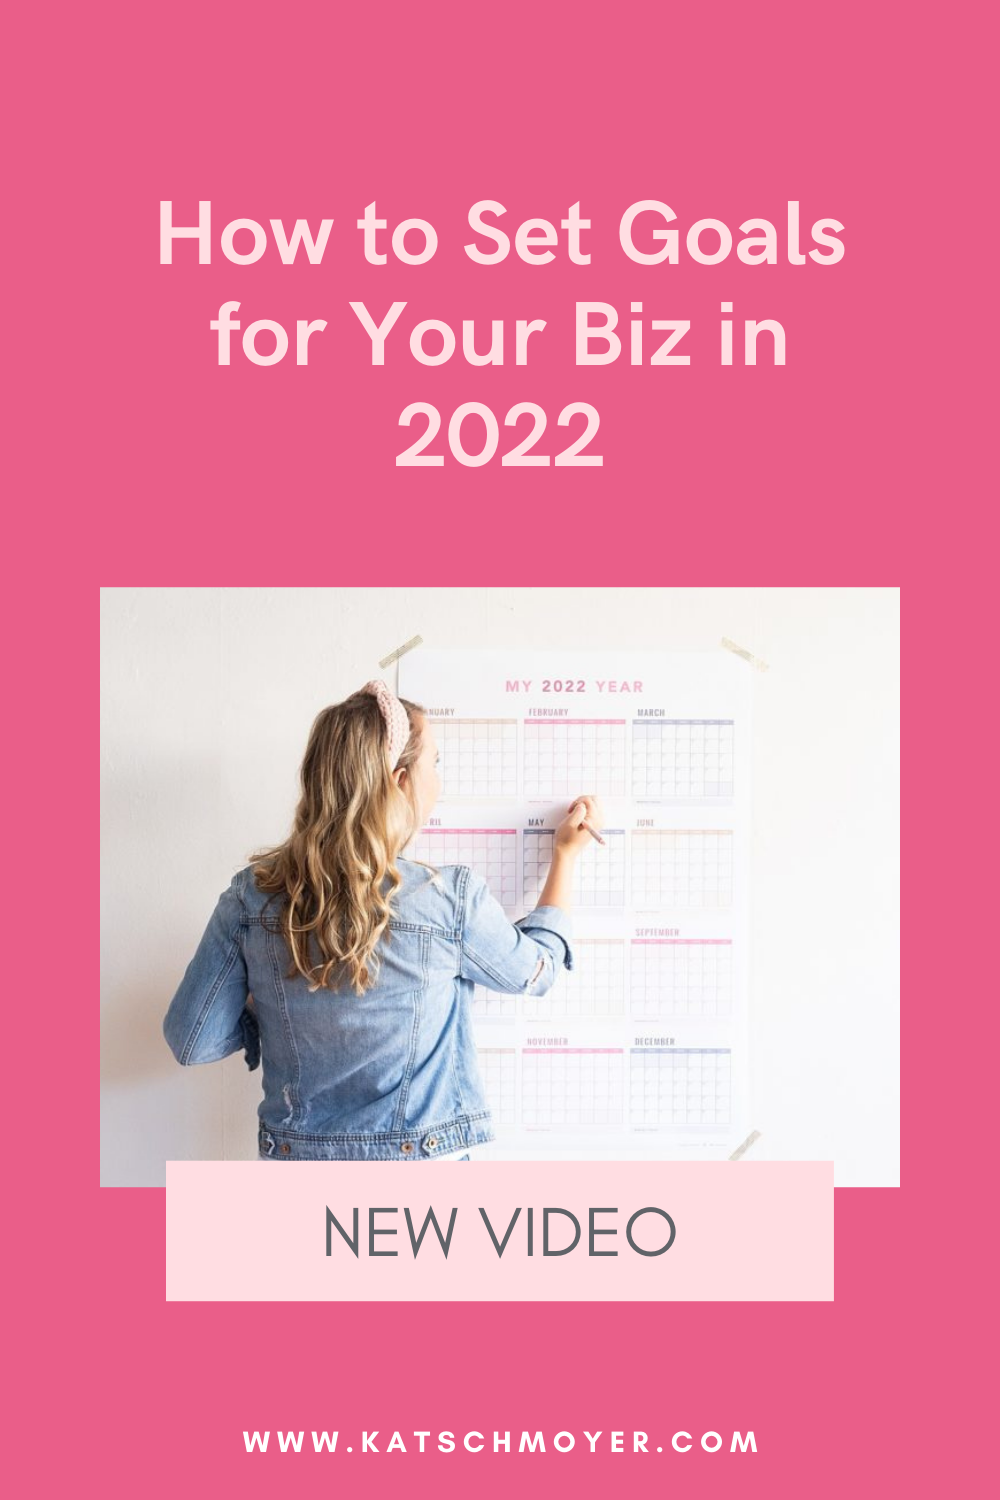 How to Set Goals for Your Biz 2022